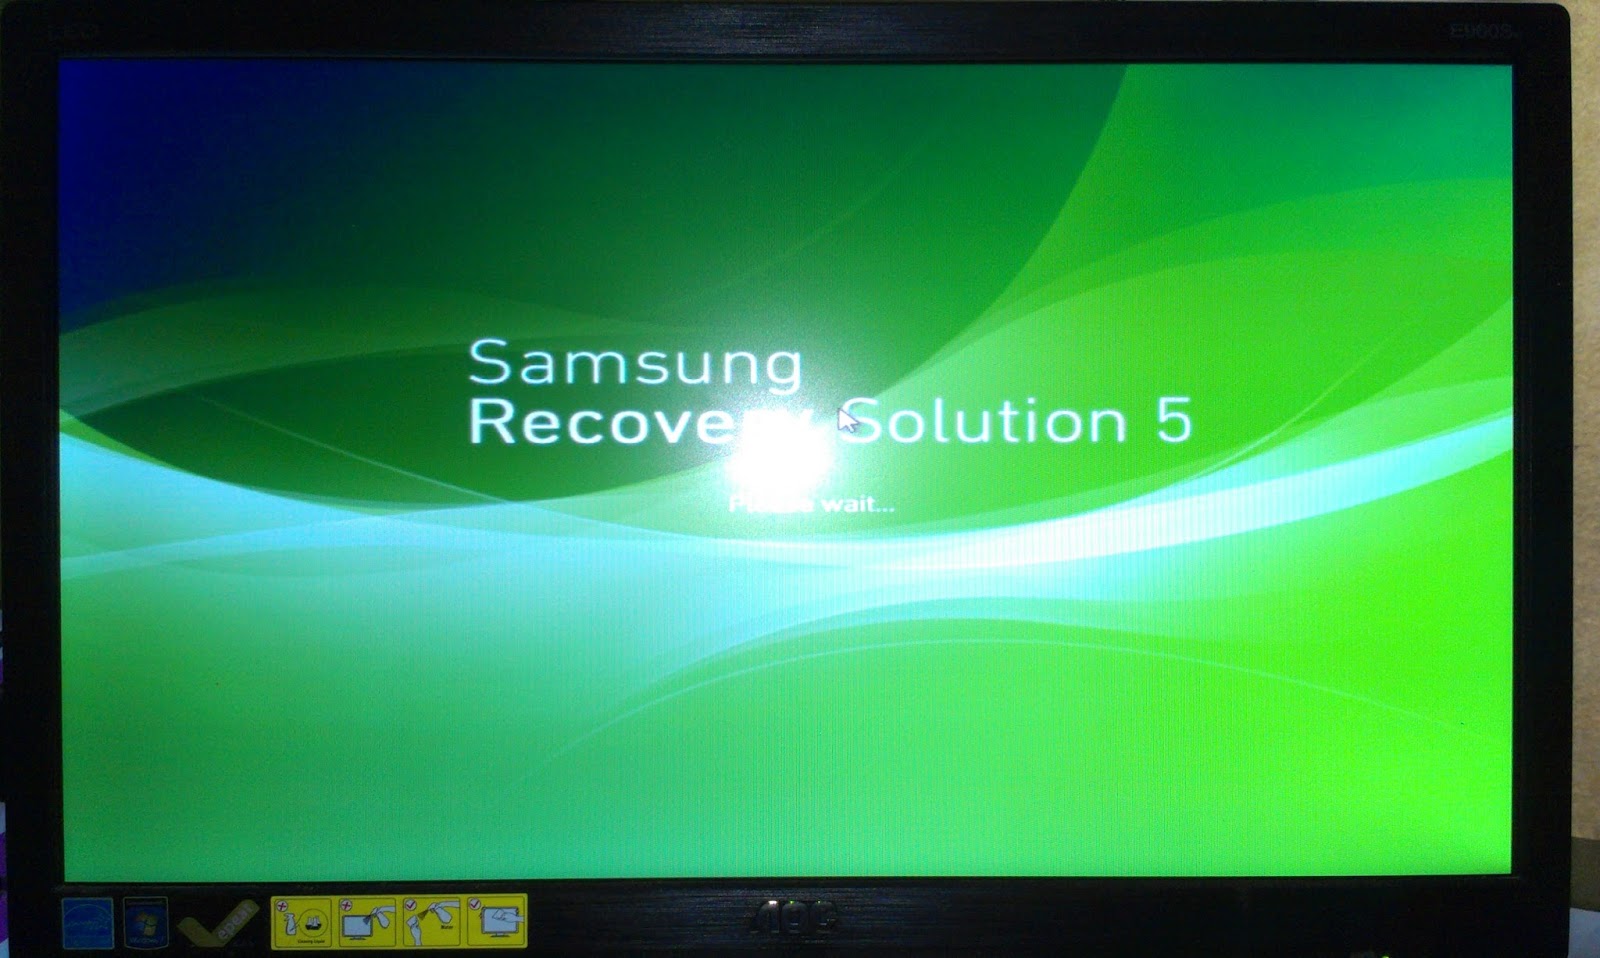 windows 10 samsung recovery solution